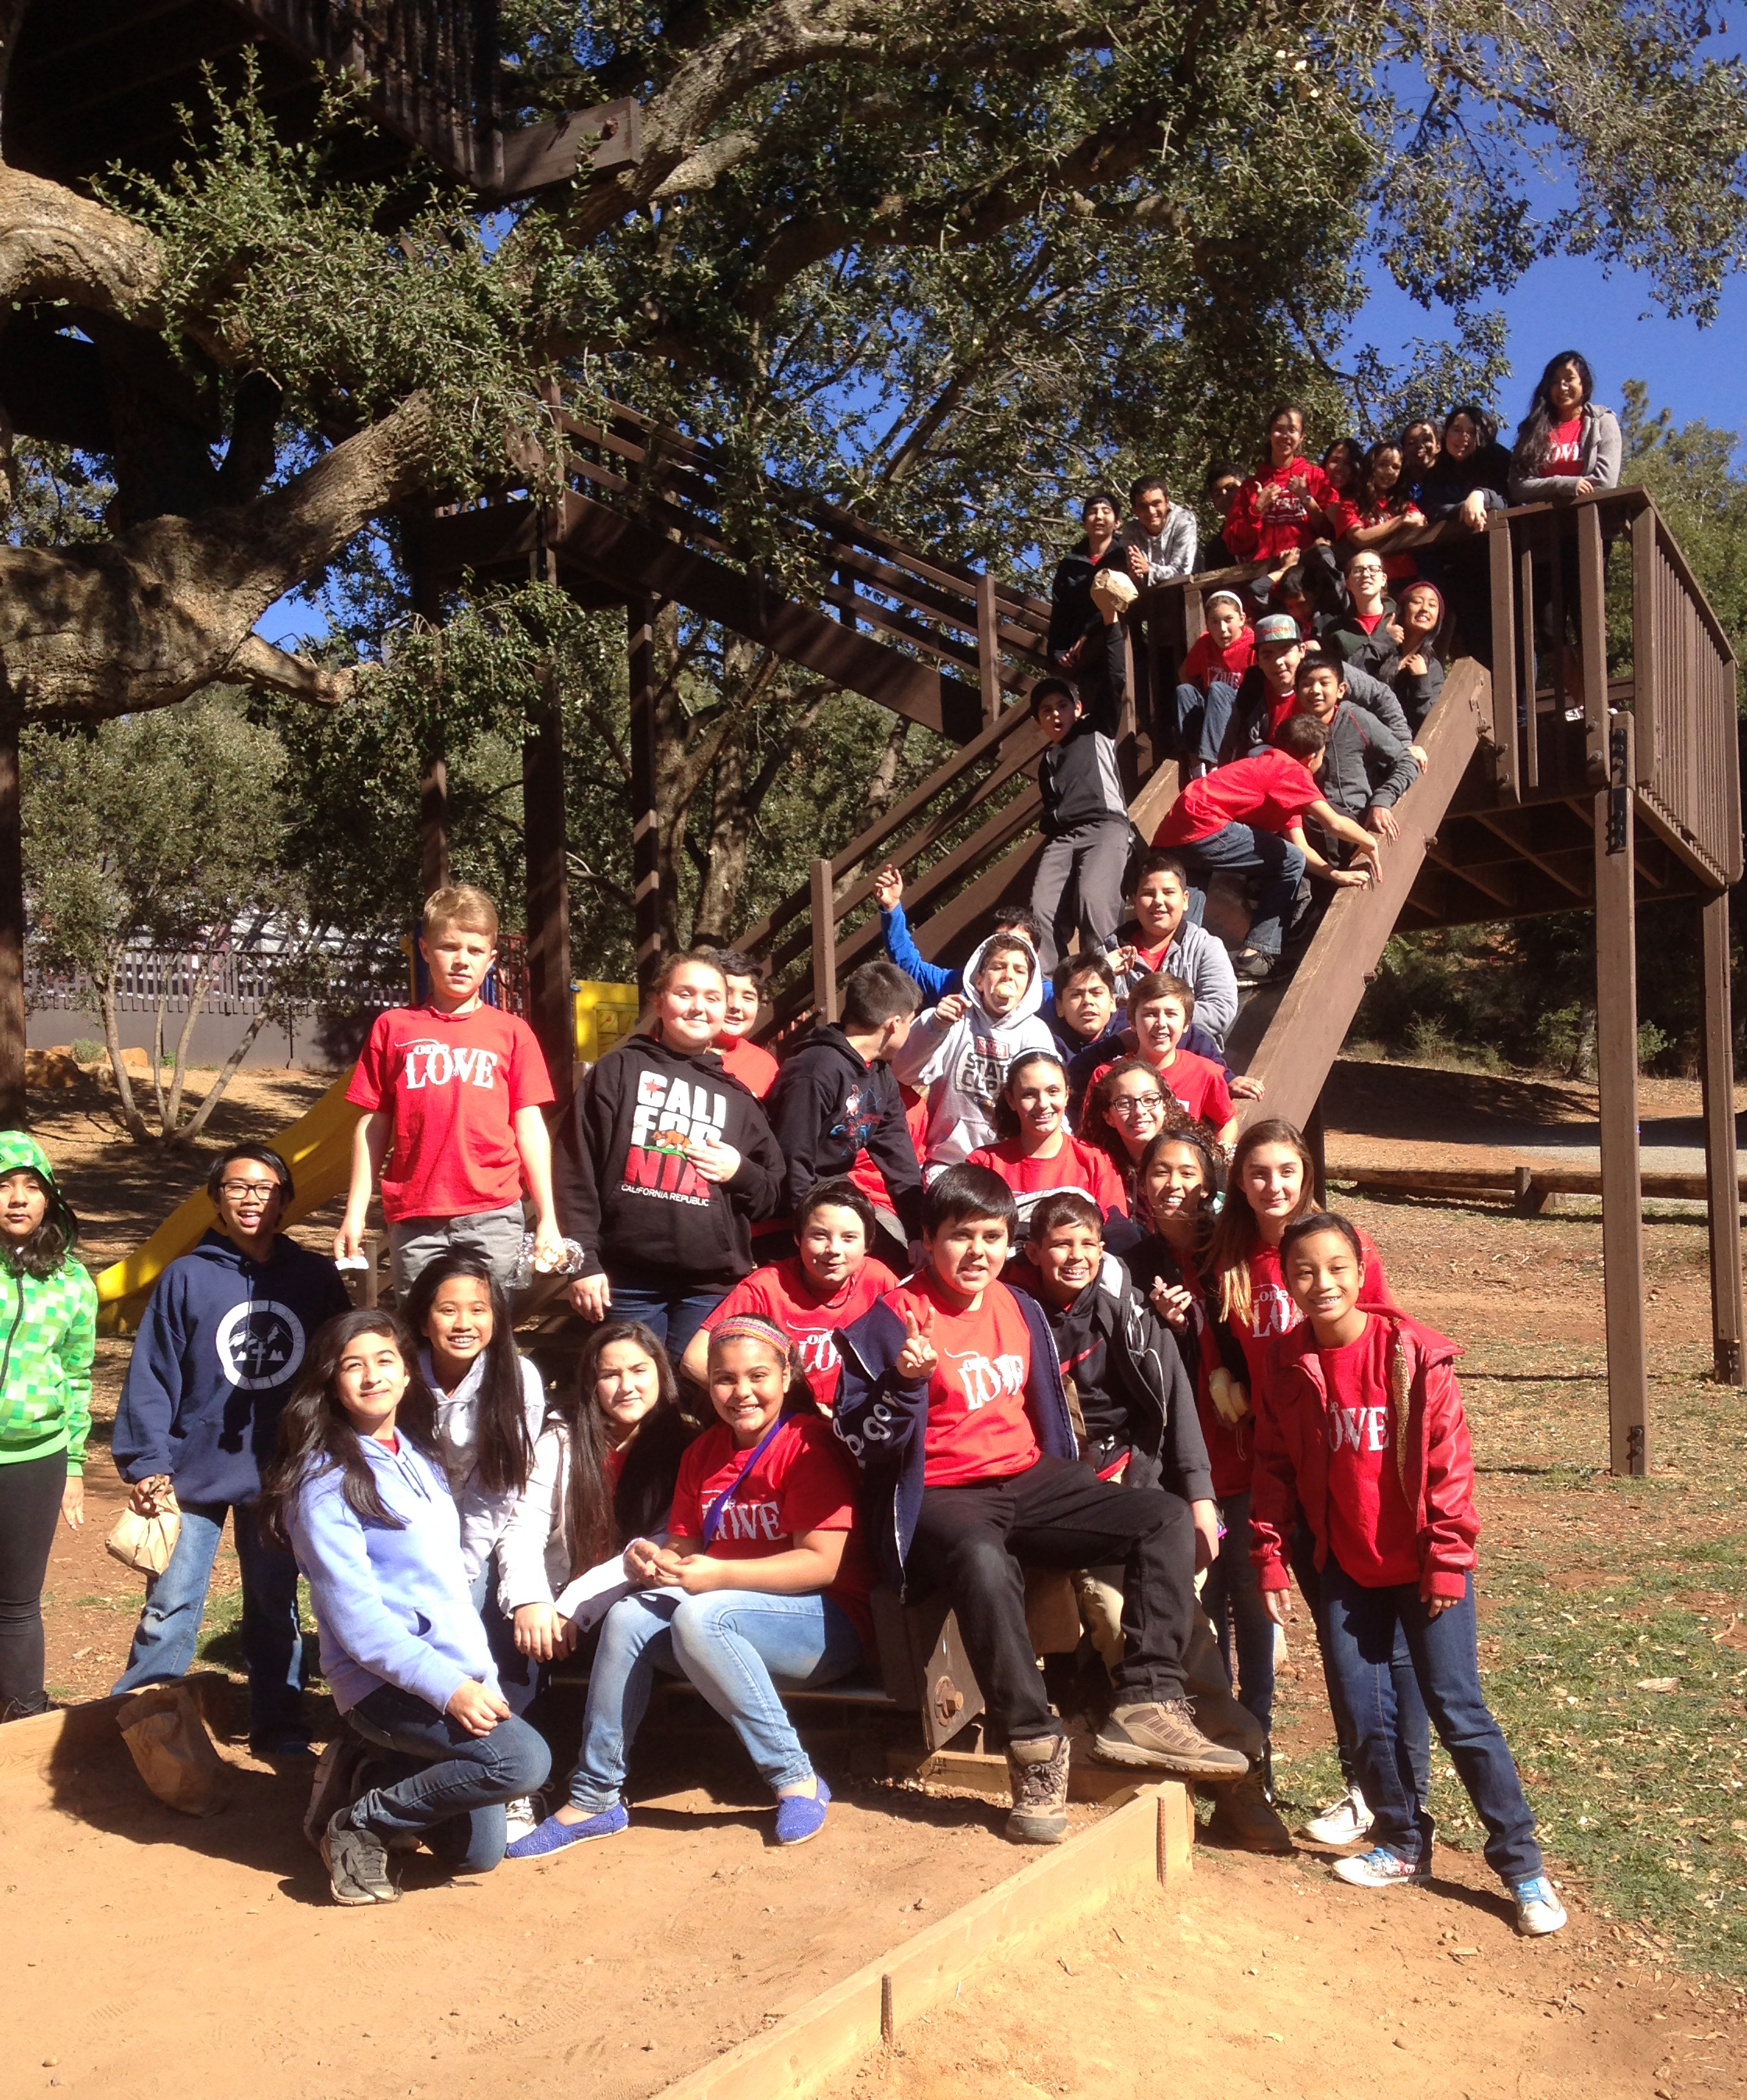 Middle School teen group gathered on treehouse